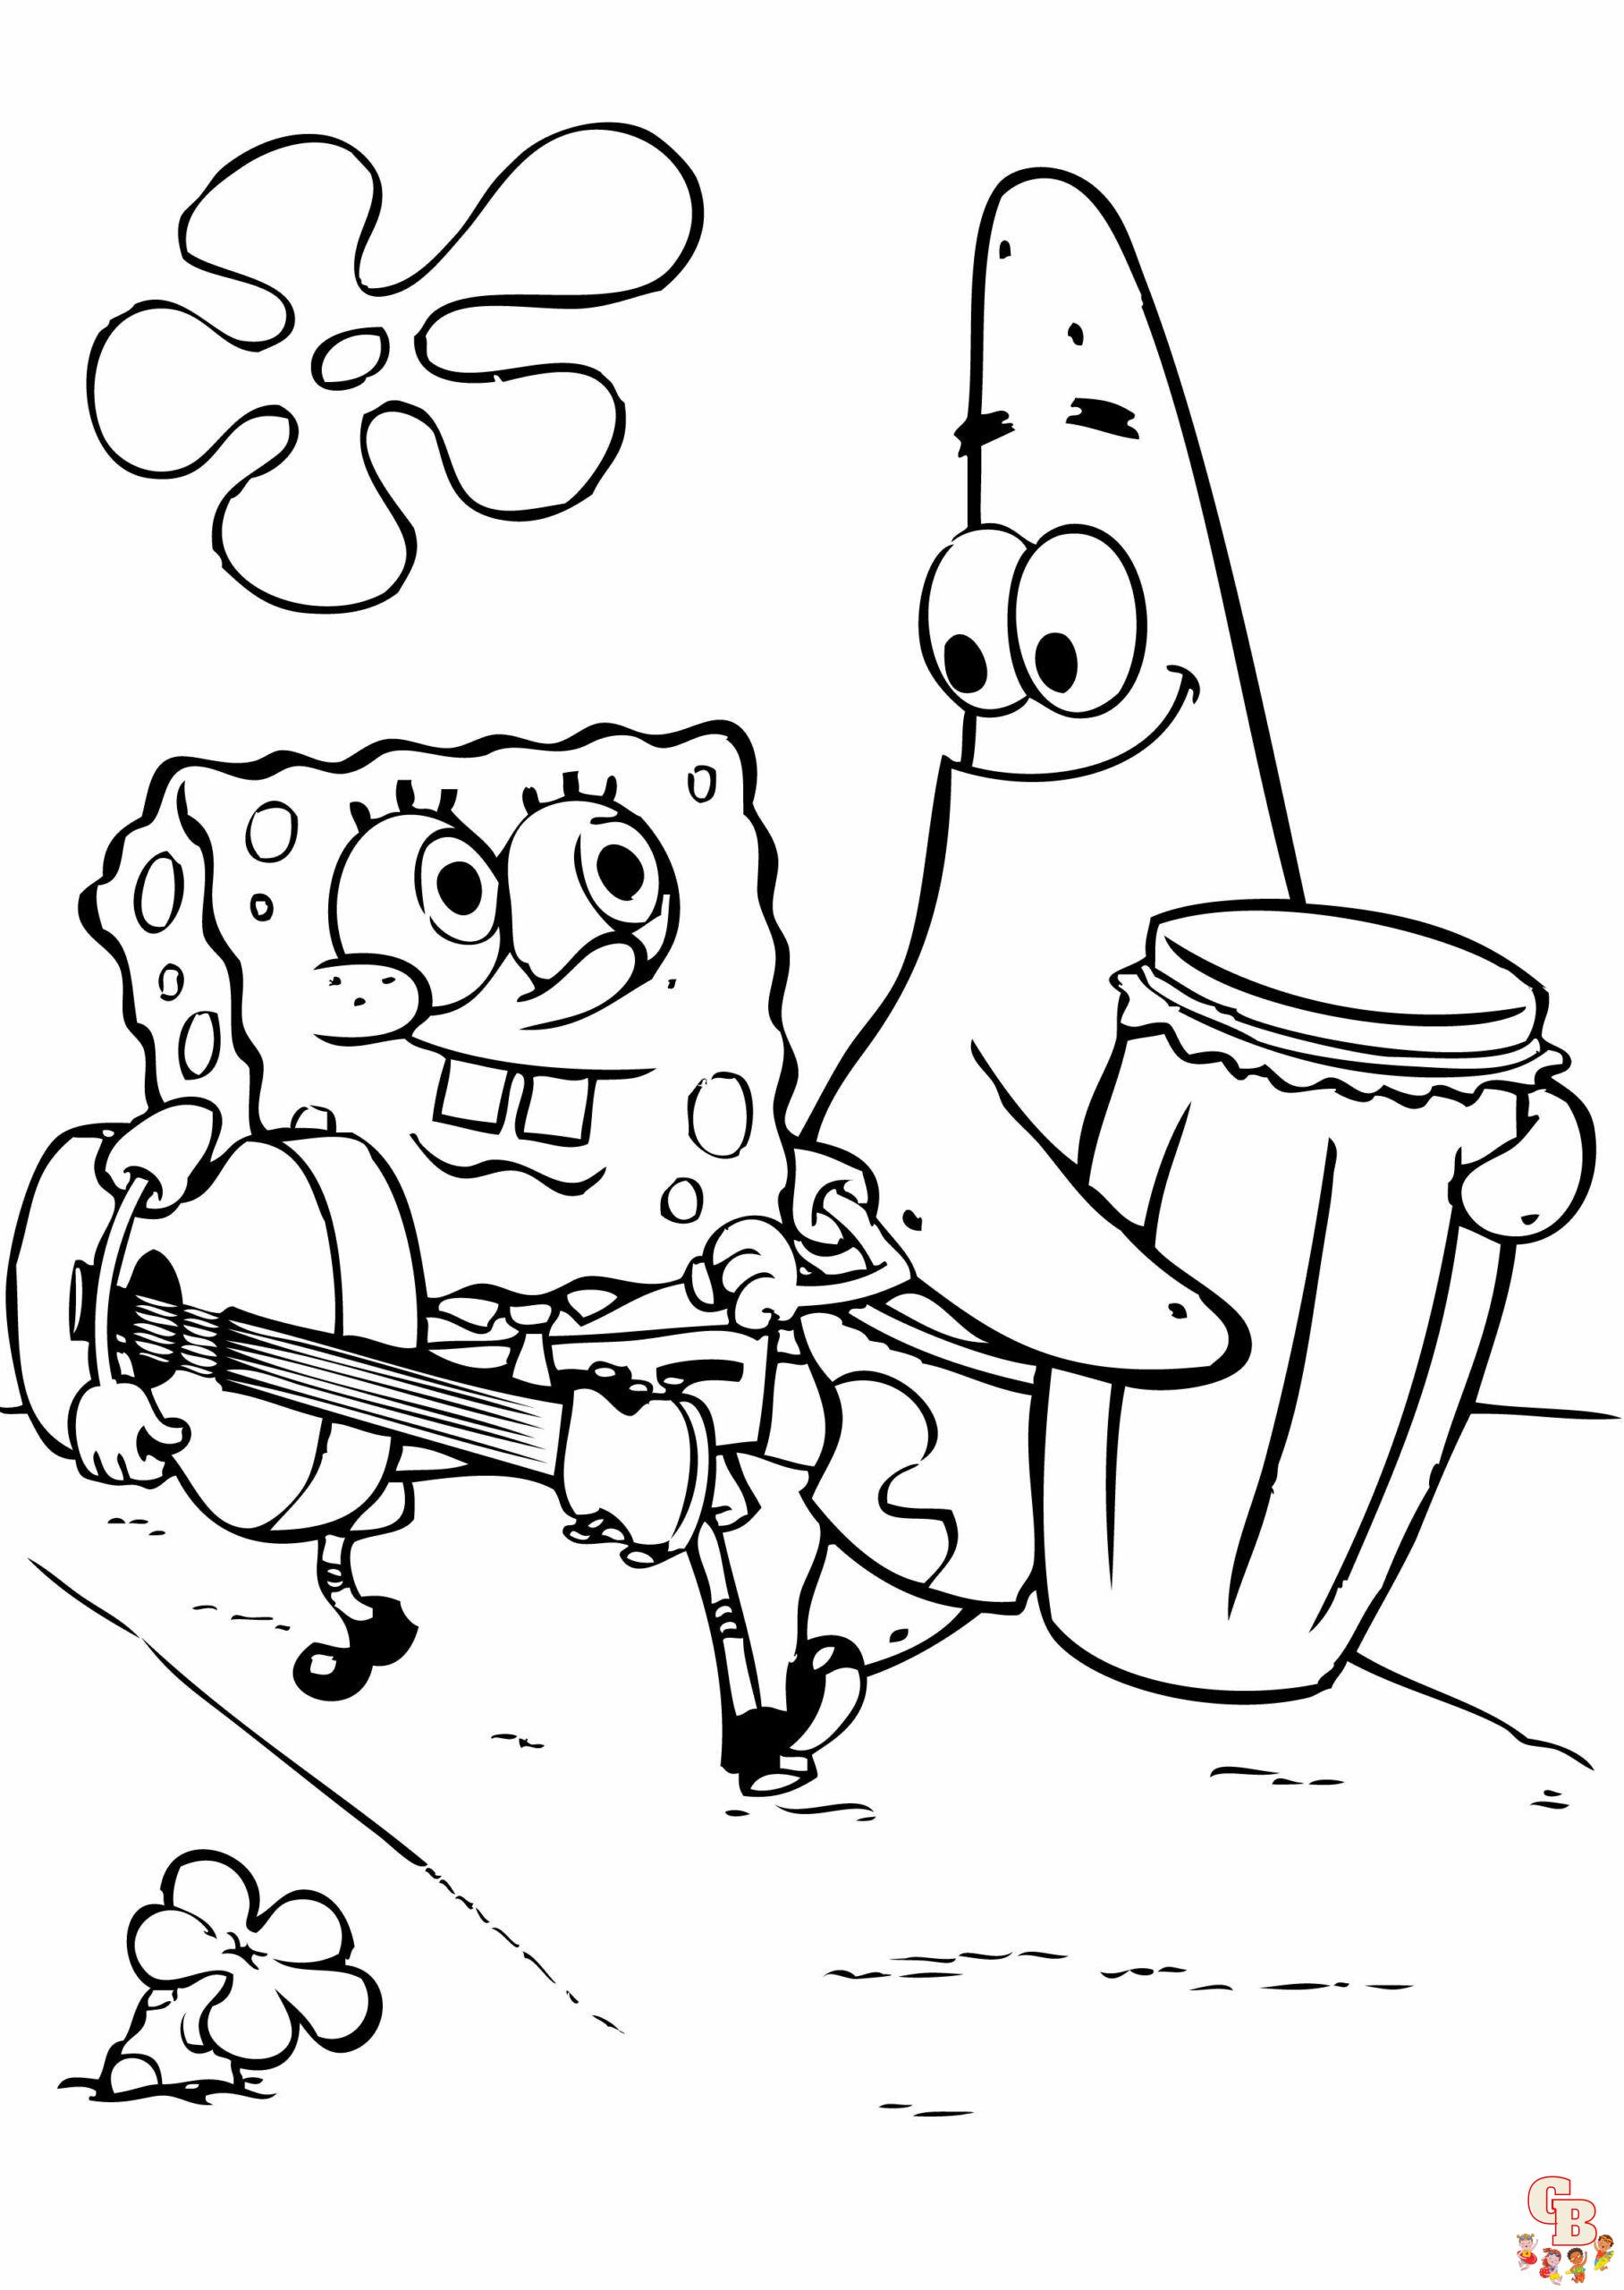 Enjoy Nickelodeon Coloring Pages for Free on GBcoloring Website